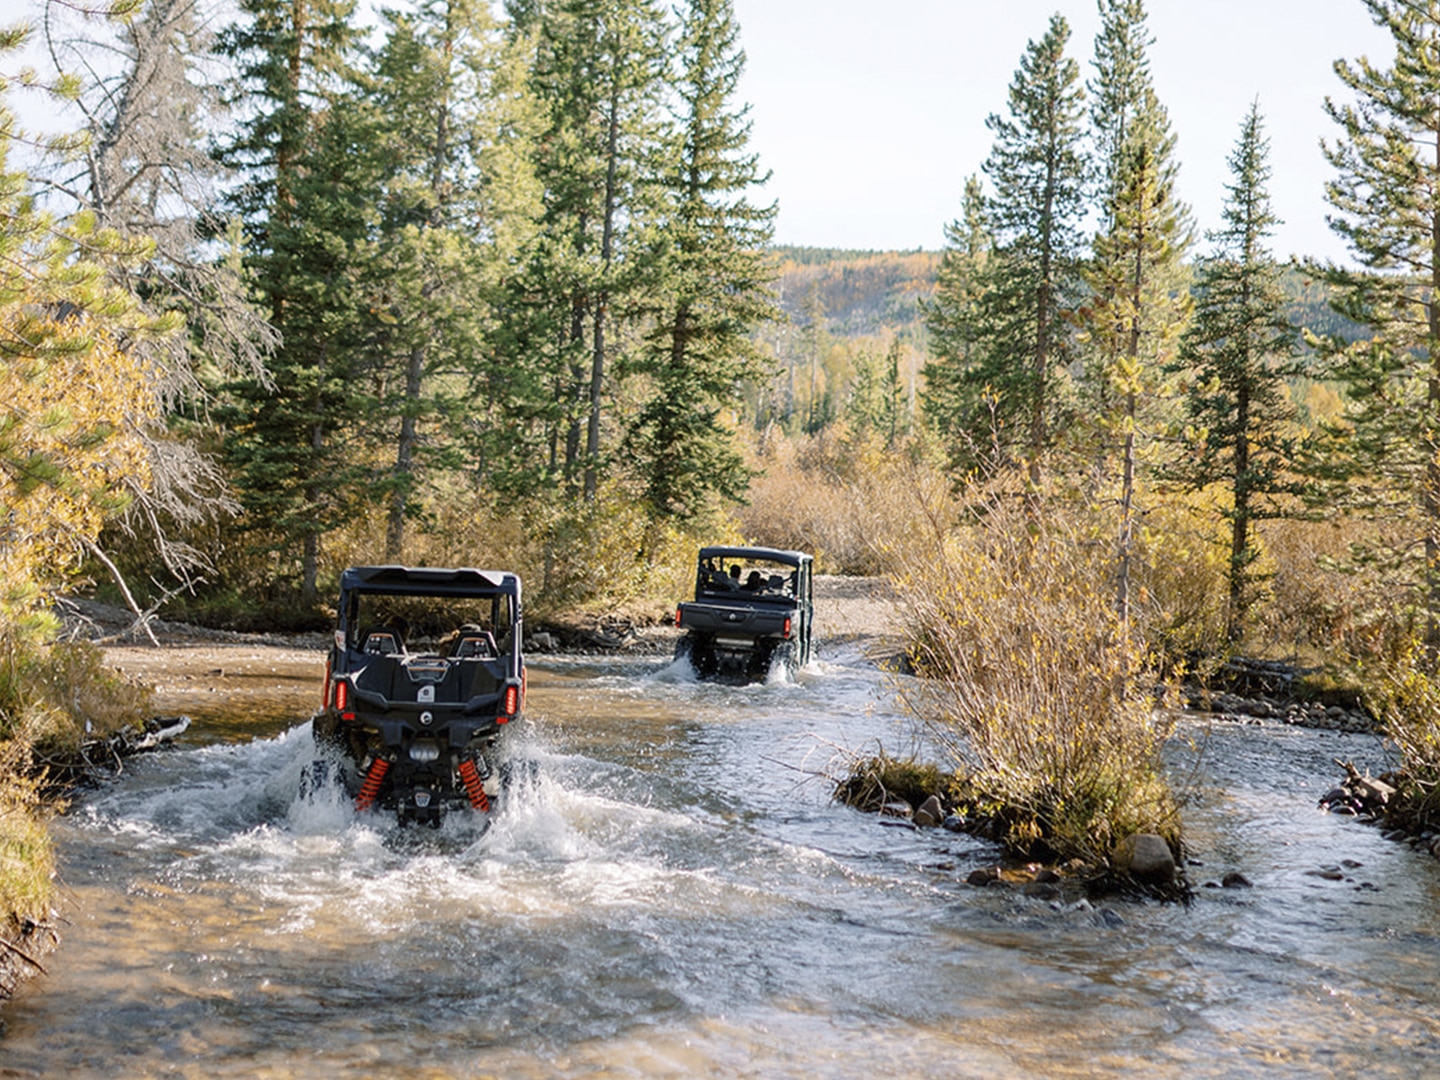 Hang on tight for this off-road thrill ride in Kamas, UT